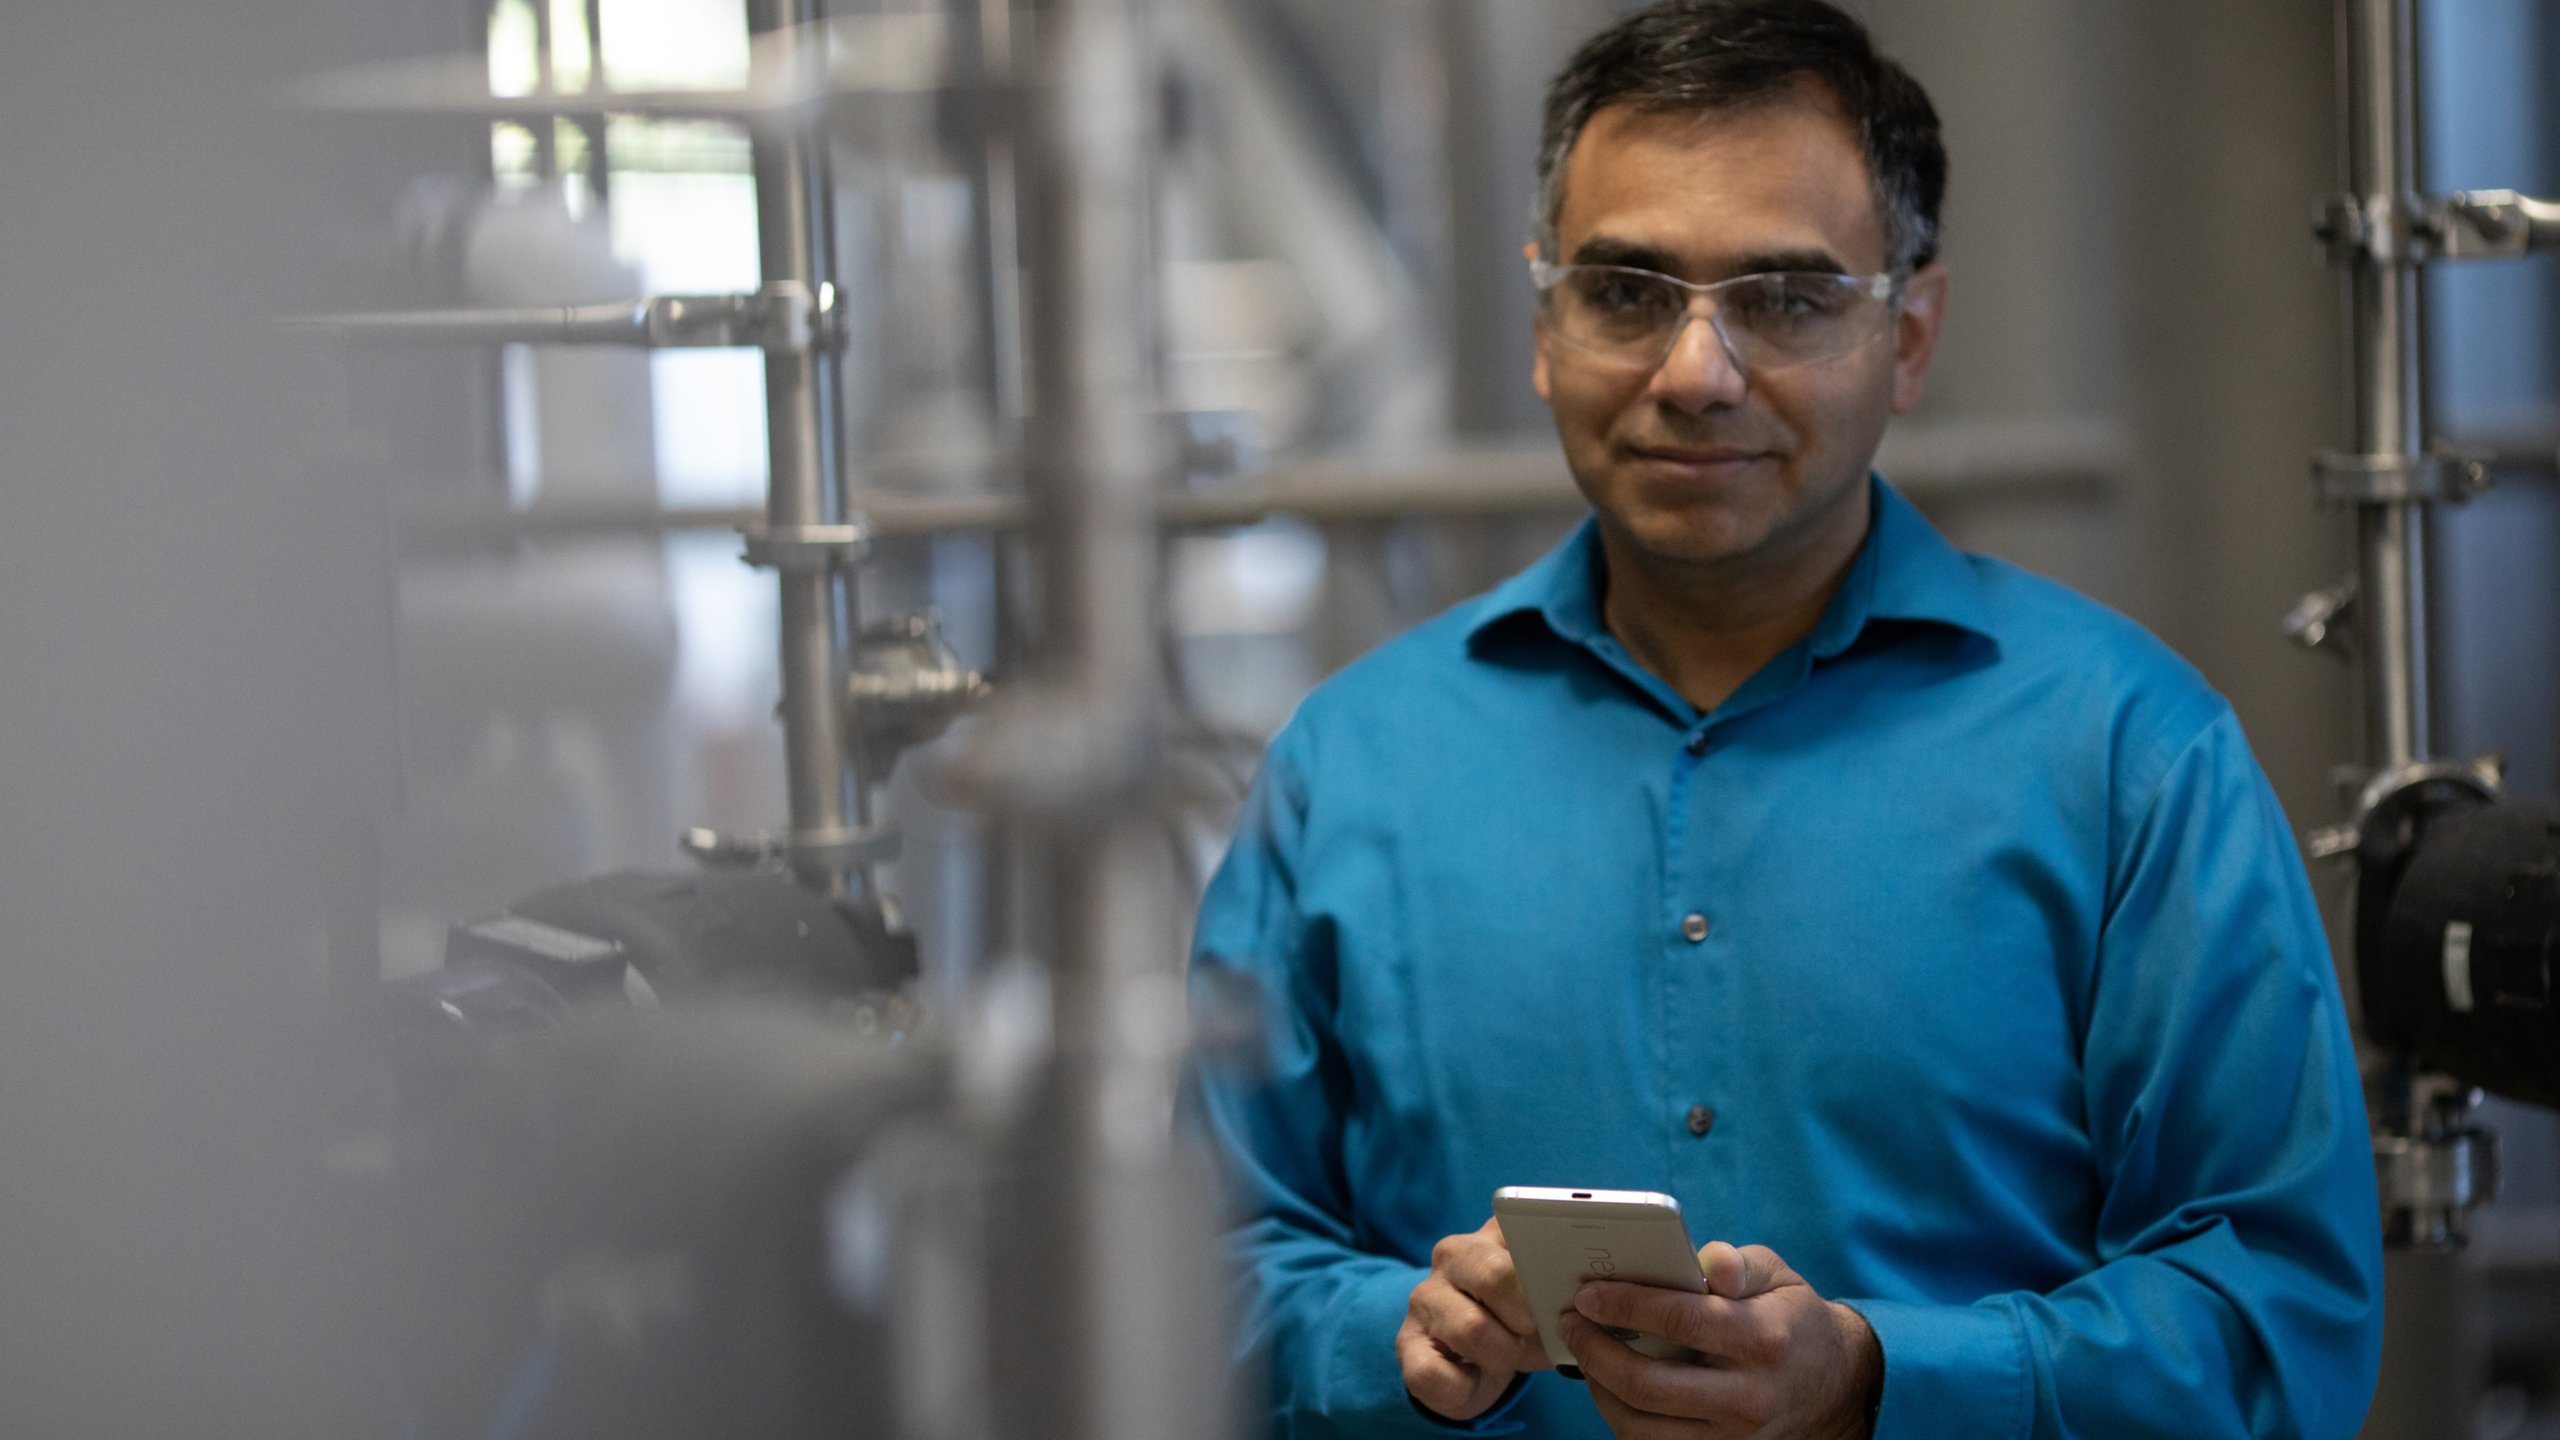 Engineer wearing a blue shirt and safety glasses in a factory looking forward holding his mobile phone